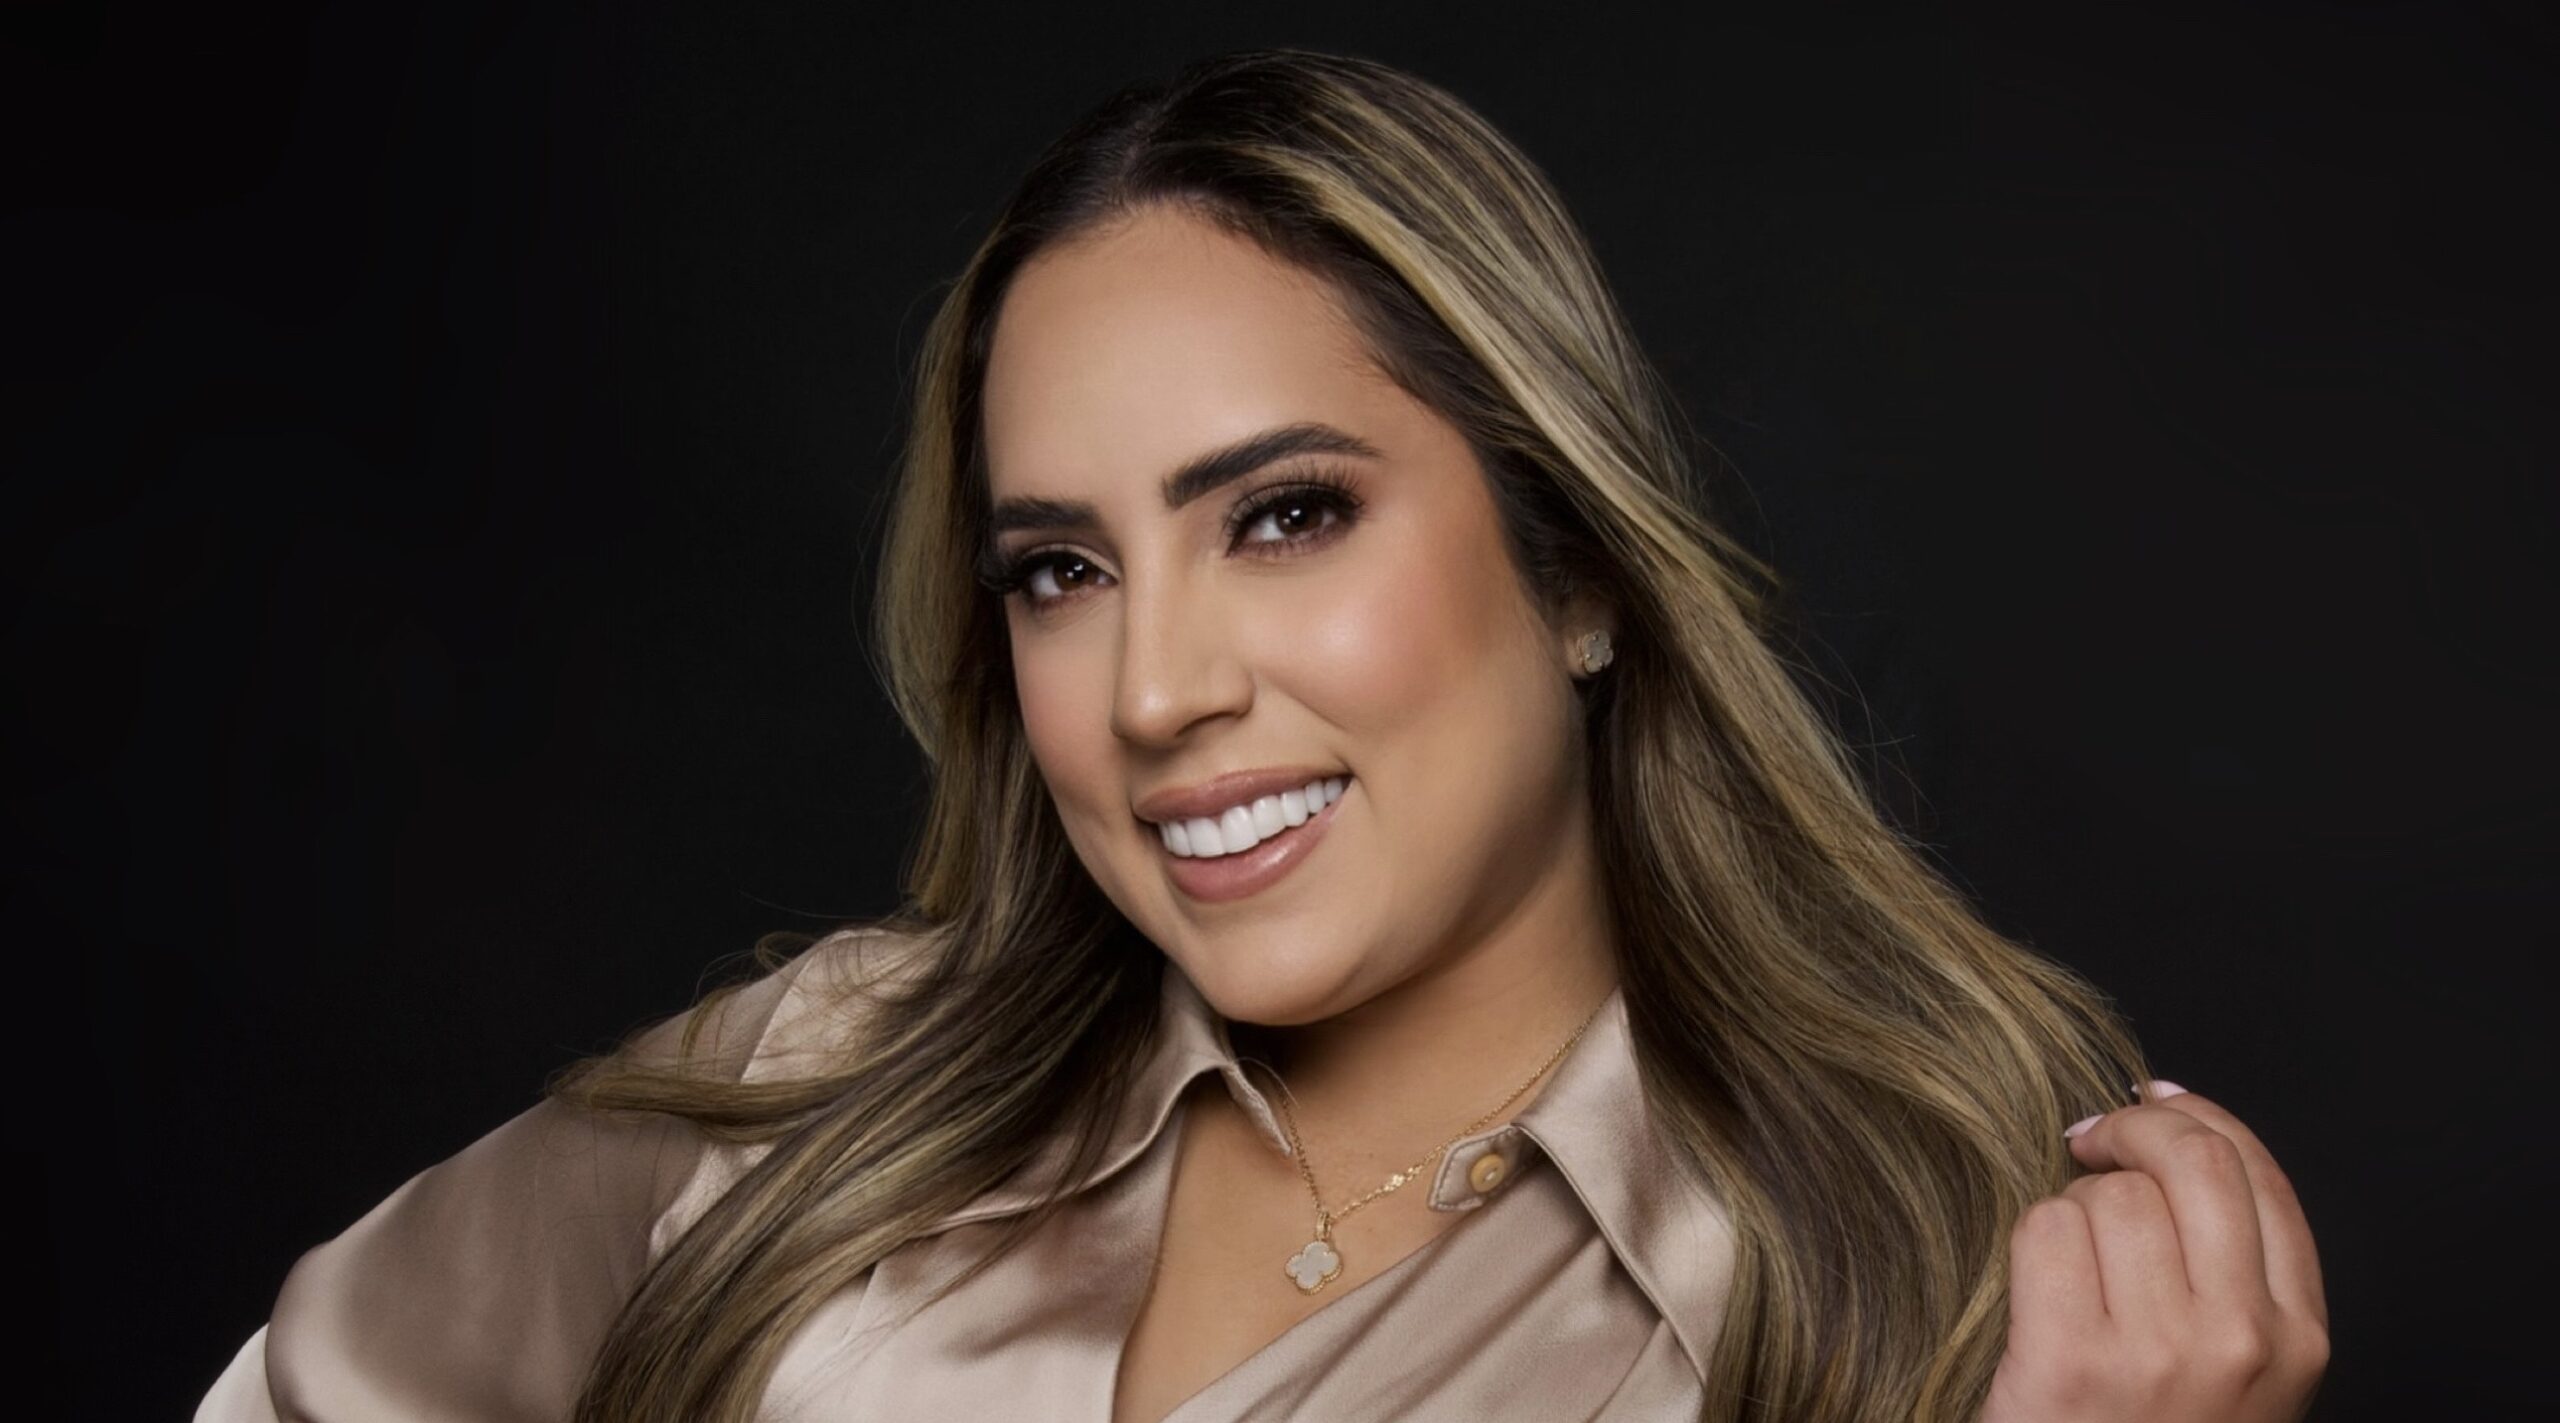 Driven by Passion, Brilla con Bet CEO Betania Olaves Shatters Stereotypes in Medical Spa Industry